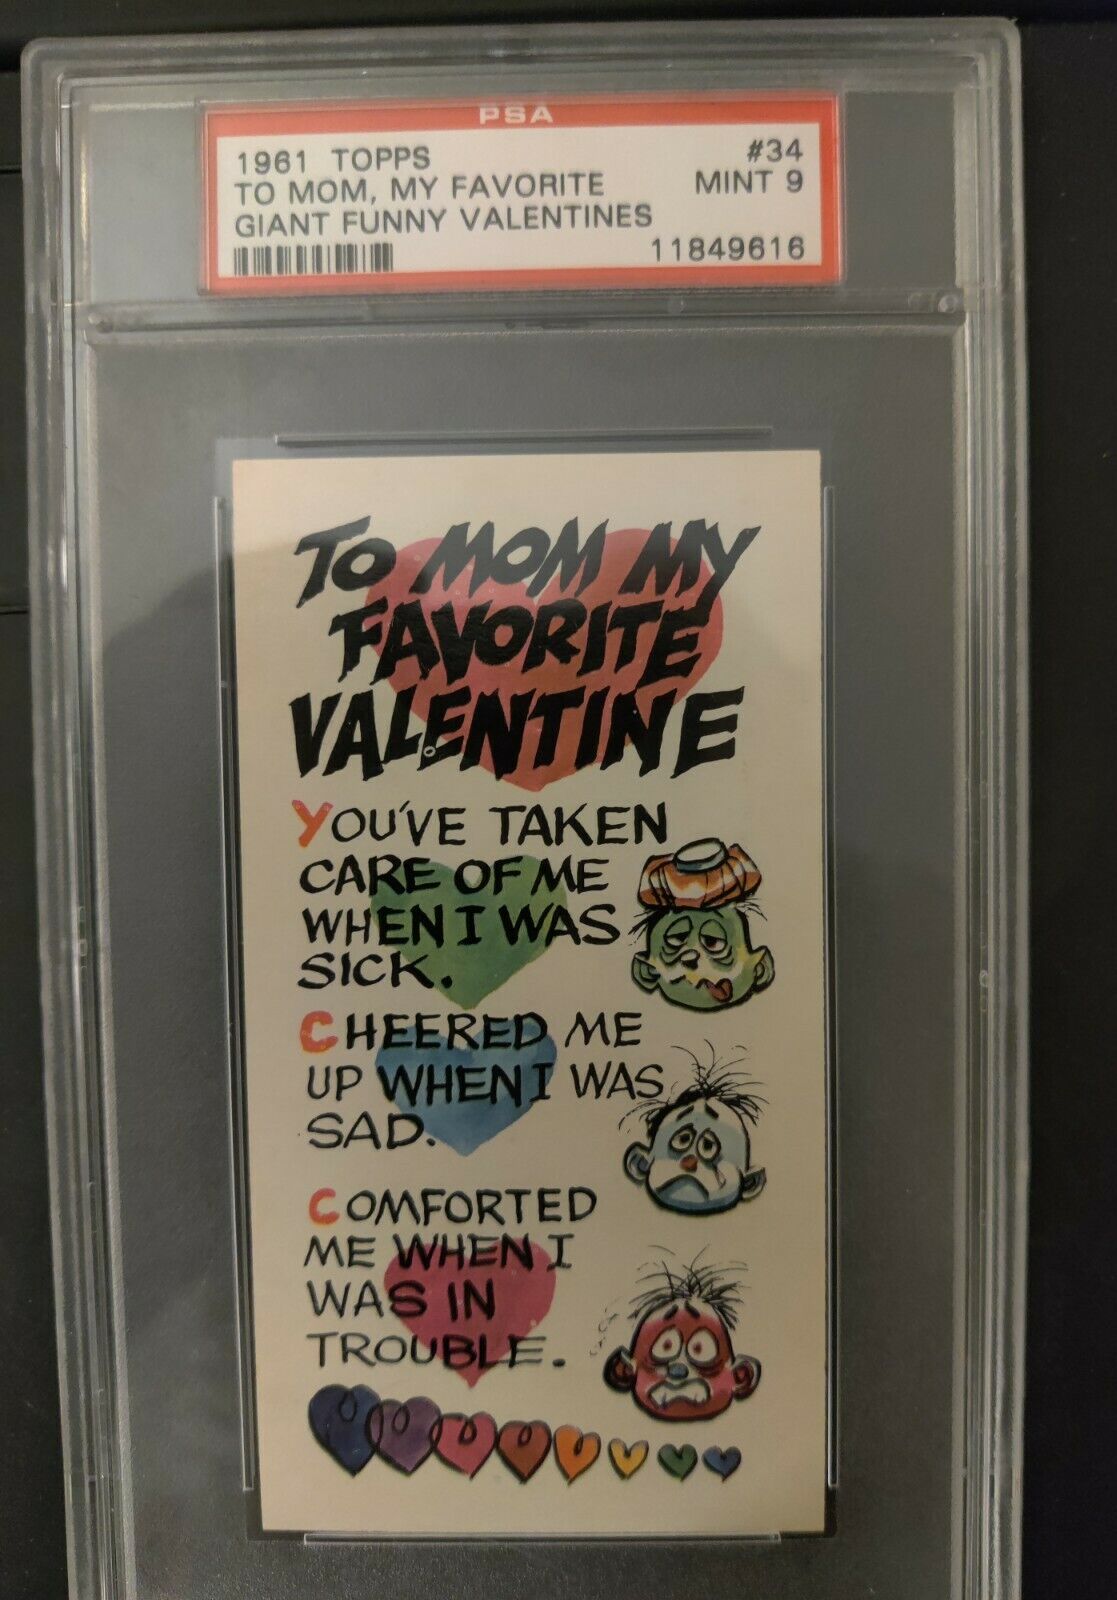 1961 TOPPS GIANT FUNNY VALENTINES #34 To Mom My Favorite PSA 9 POP 5 1 higher